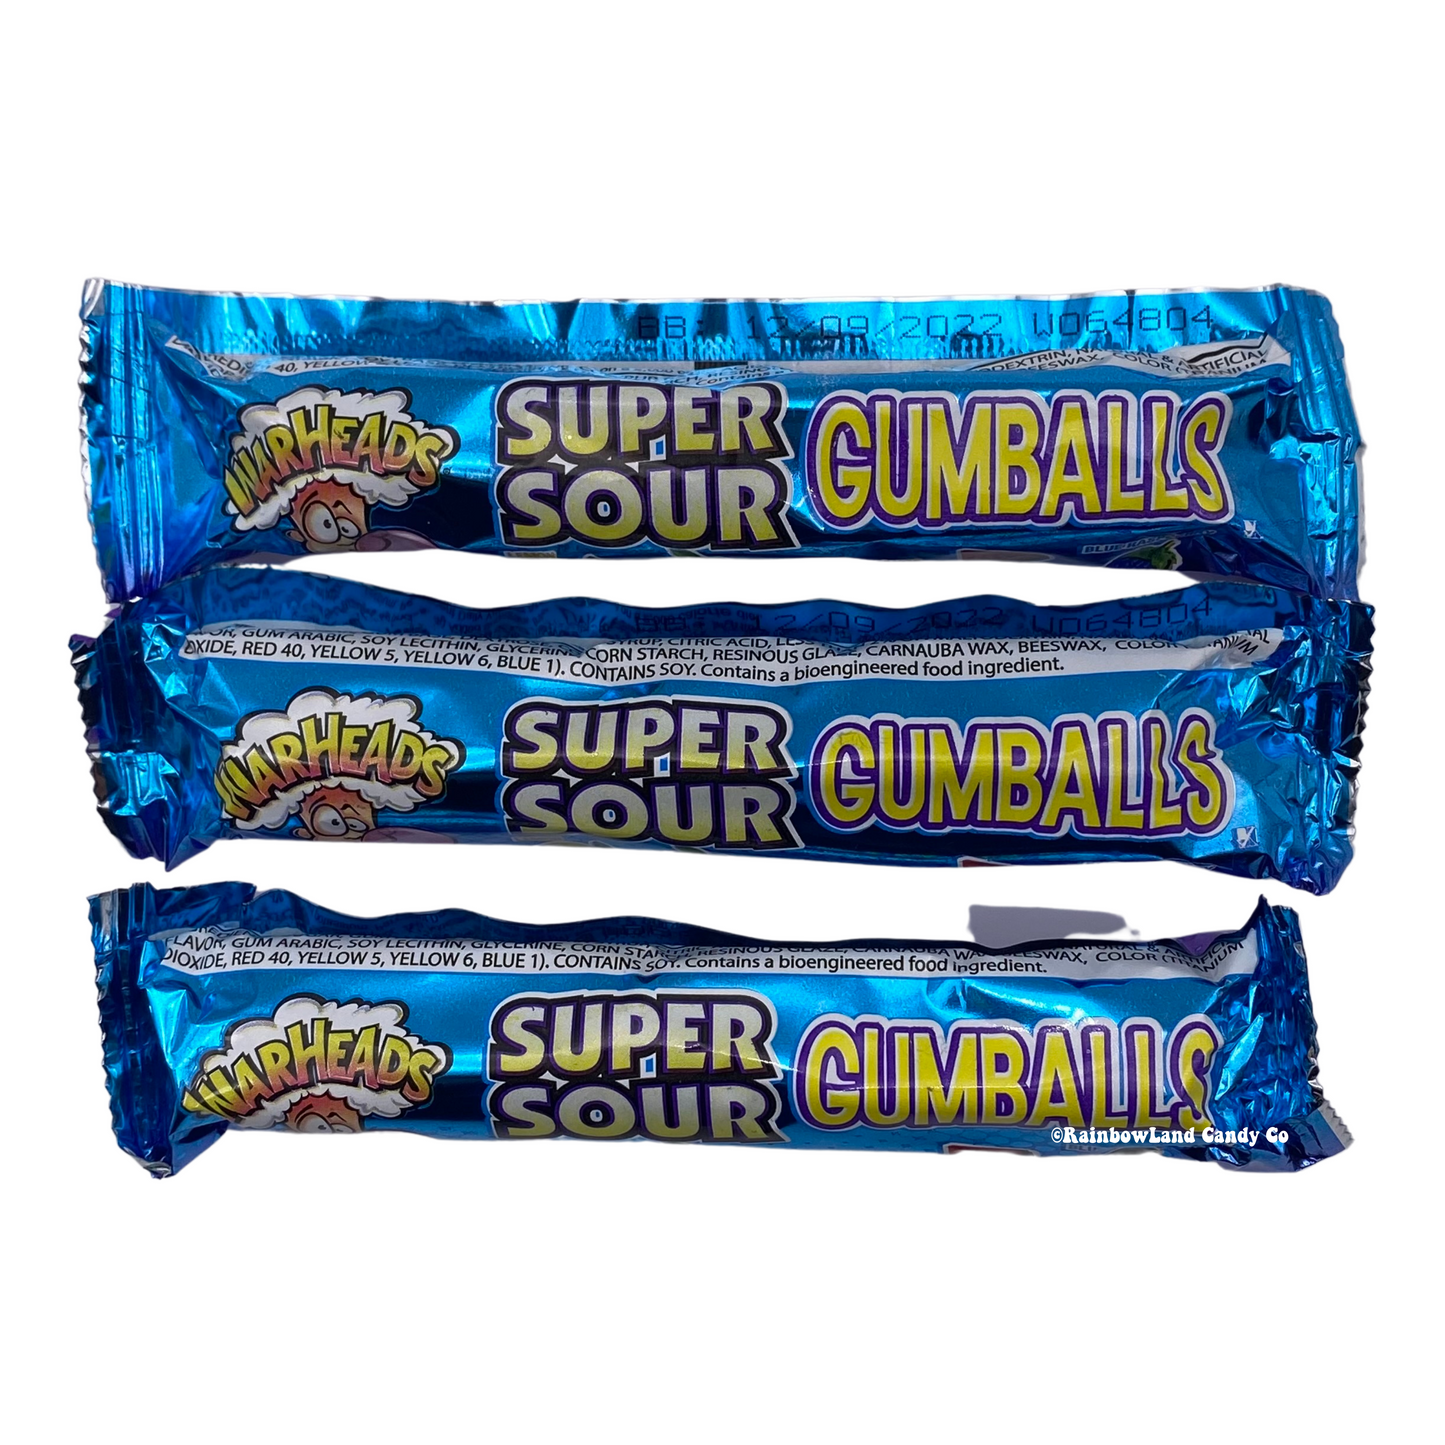 WarHeads Super Sour Gumballs (one pack)